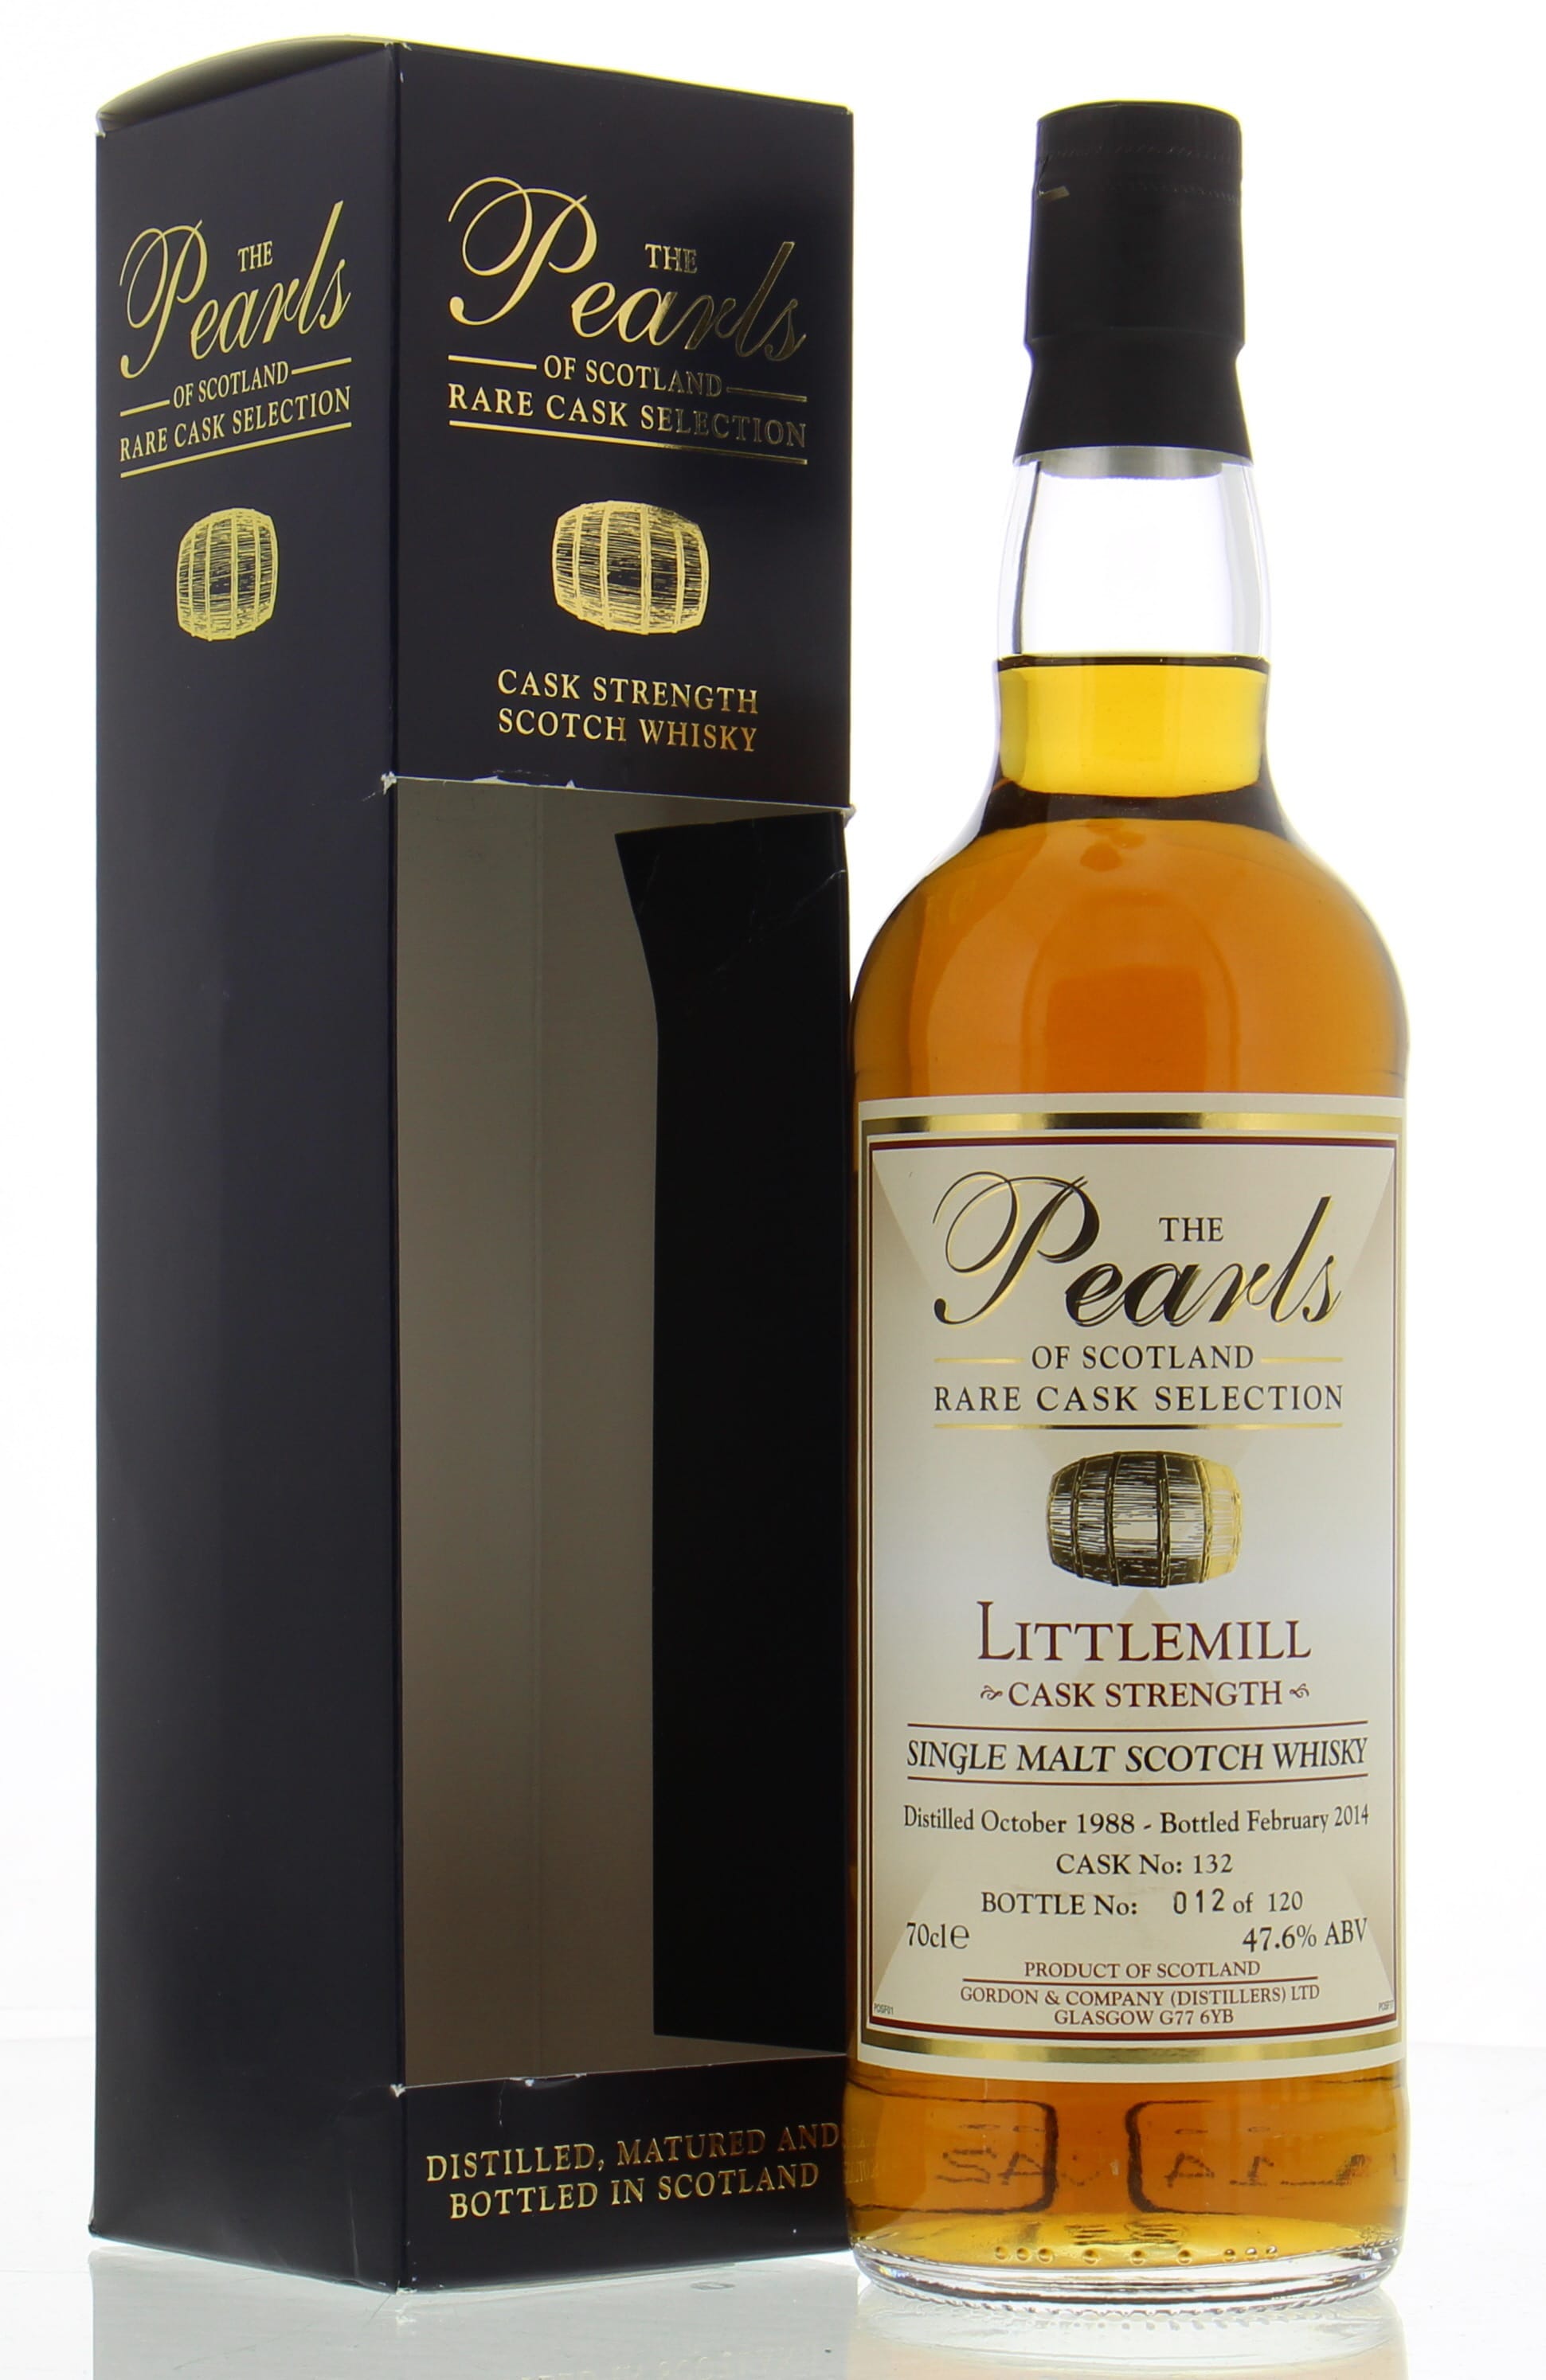 Littlemill - 26 Years Old The Pearls of Scotland Cask:132 47.6% 1988